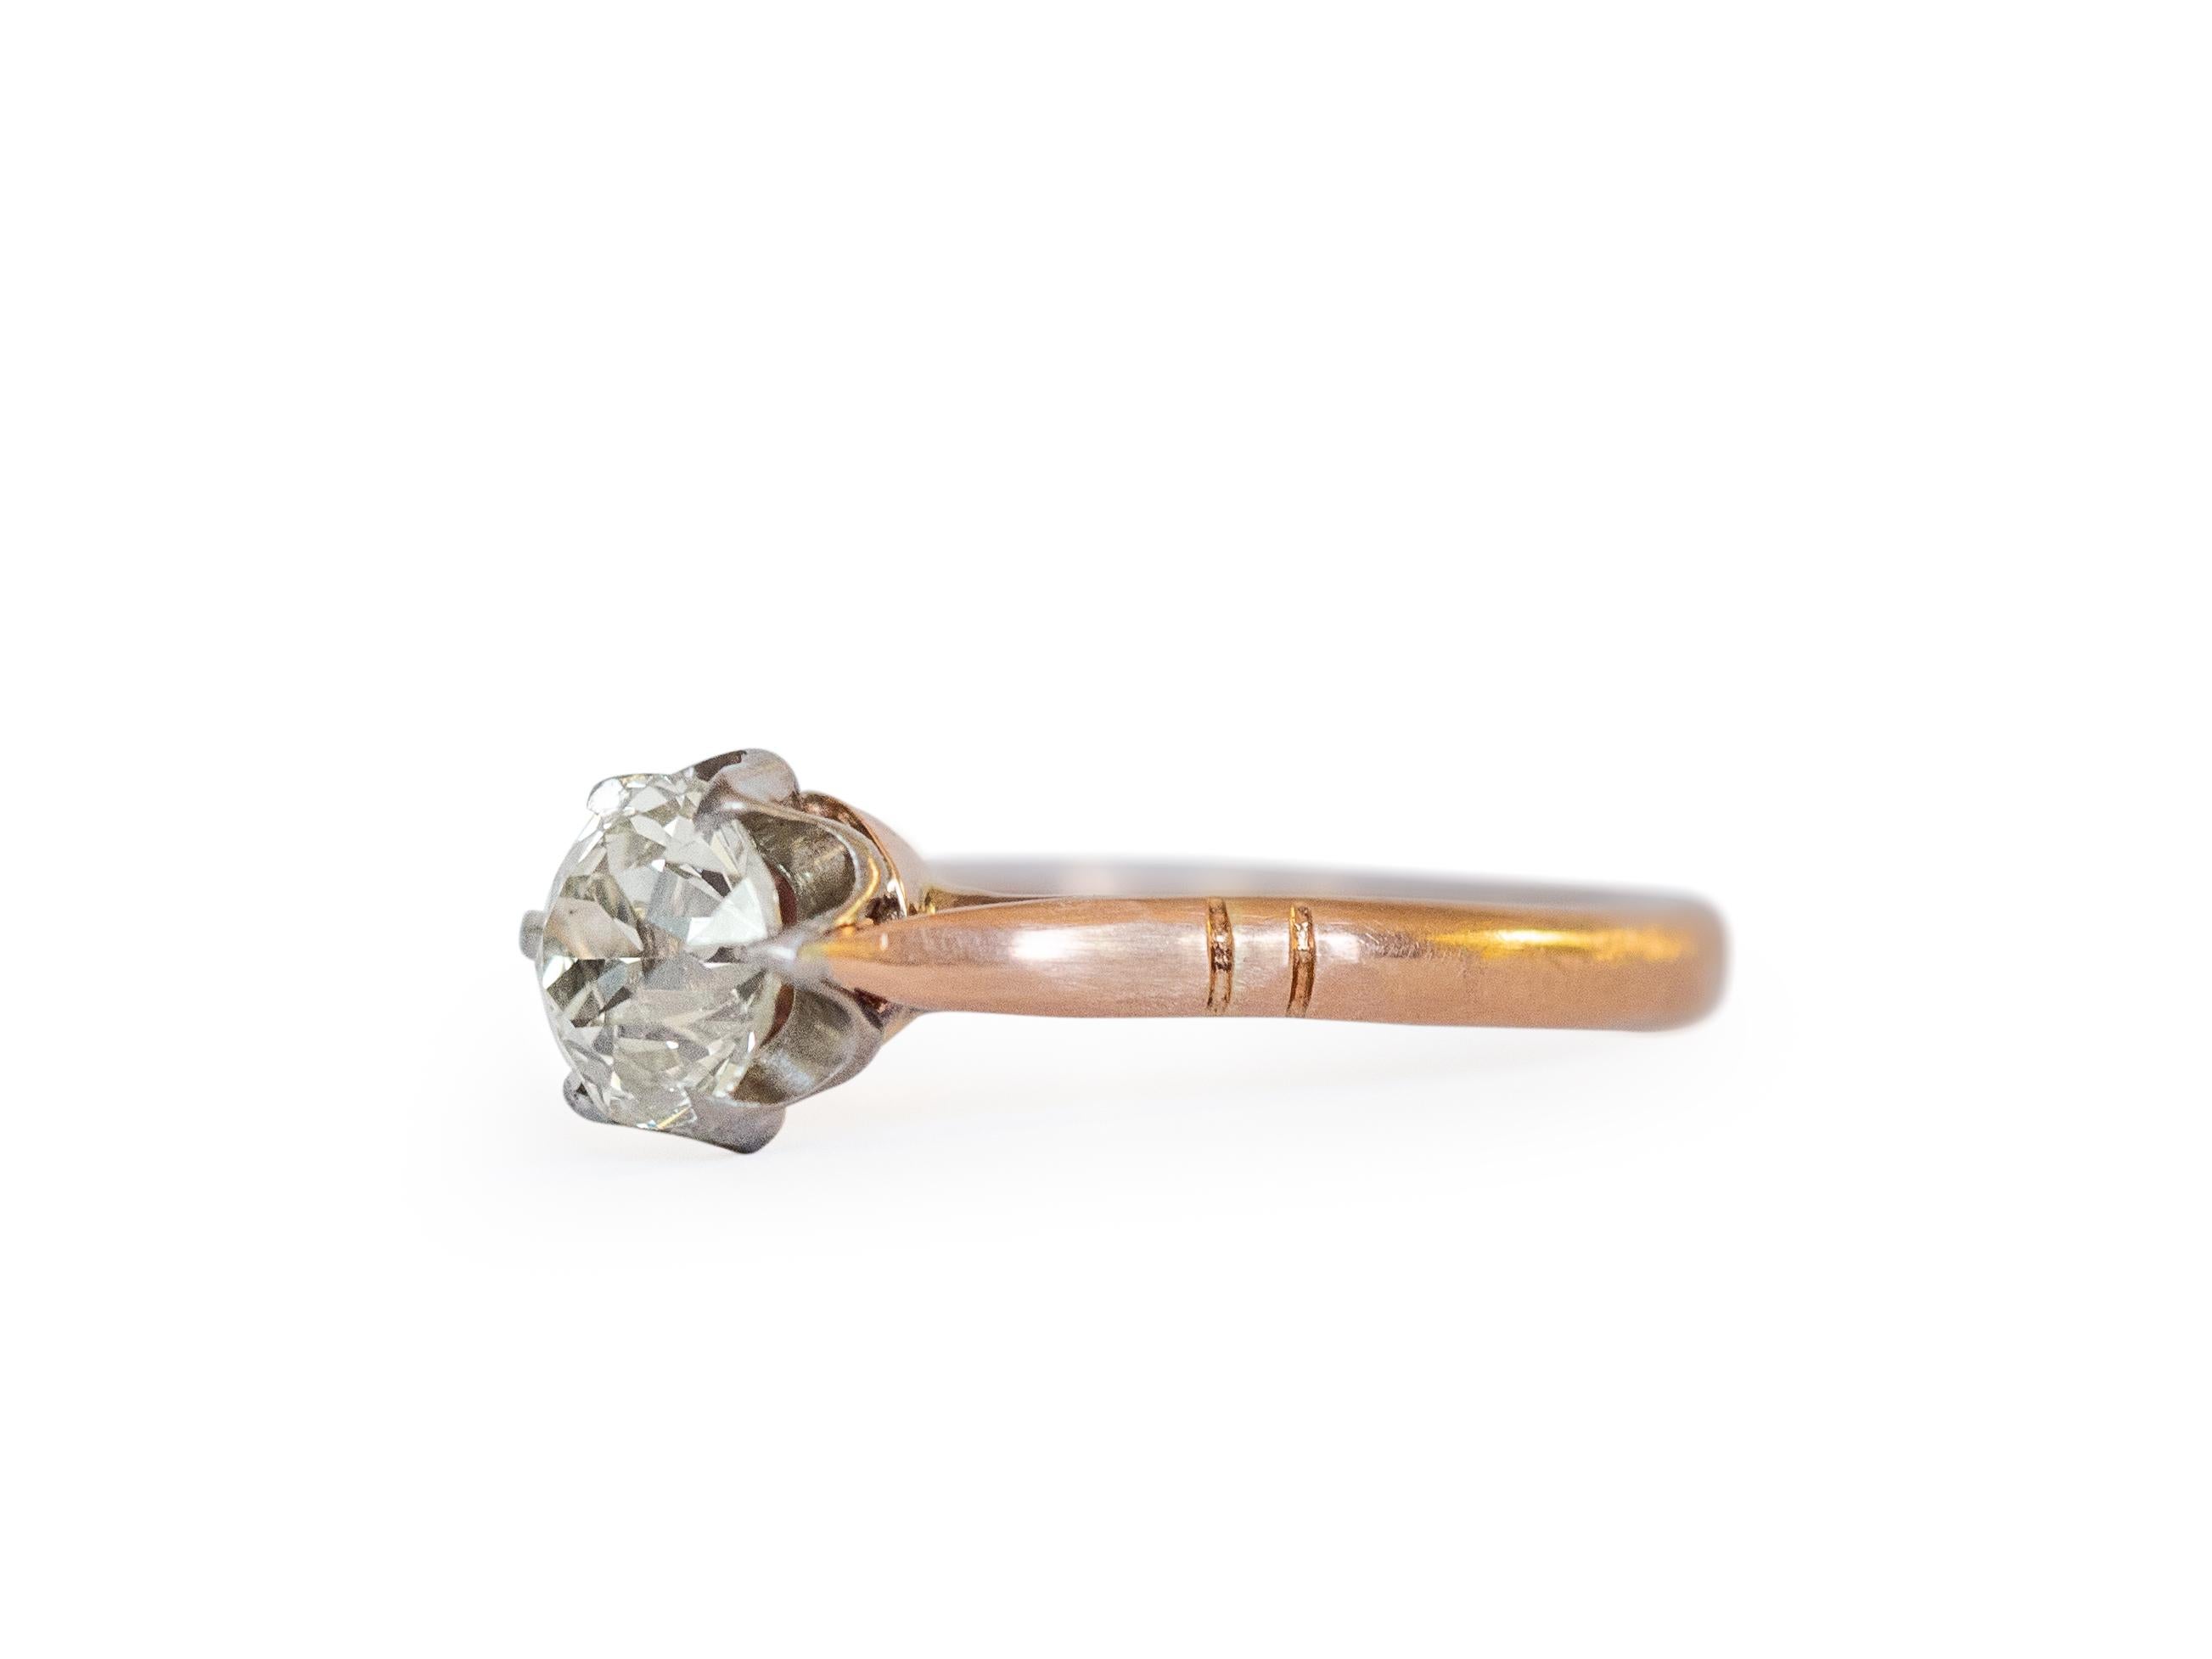 Ring Size: 7
Metal Type: 14K Rose Gold  [Hallmarked, and Tested]
Weight: 4 grams

Center Diamond Details:
Weight: 1.01 carat
Cut: Old European Brilliant
Color: Q-R
Clarity: VS1

Finger to Top of Stone Measurement: 6mm
Condition:  Excellent